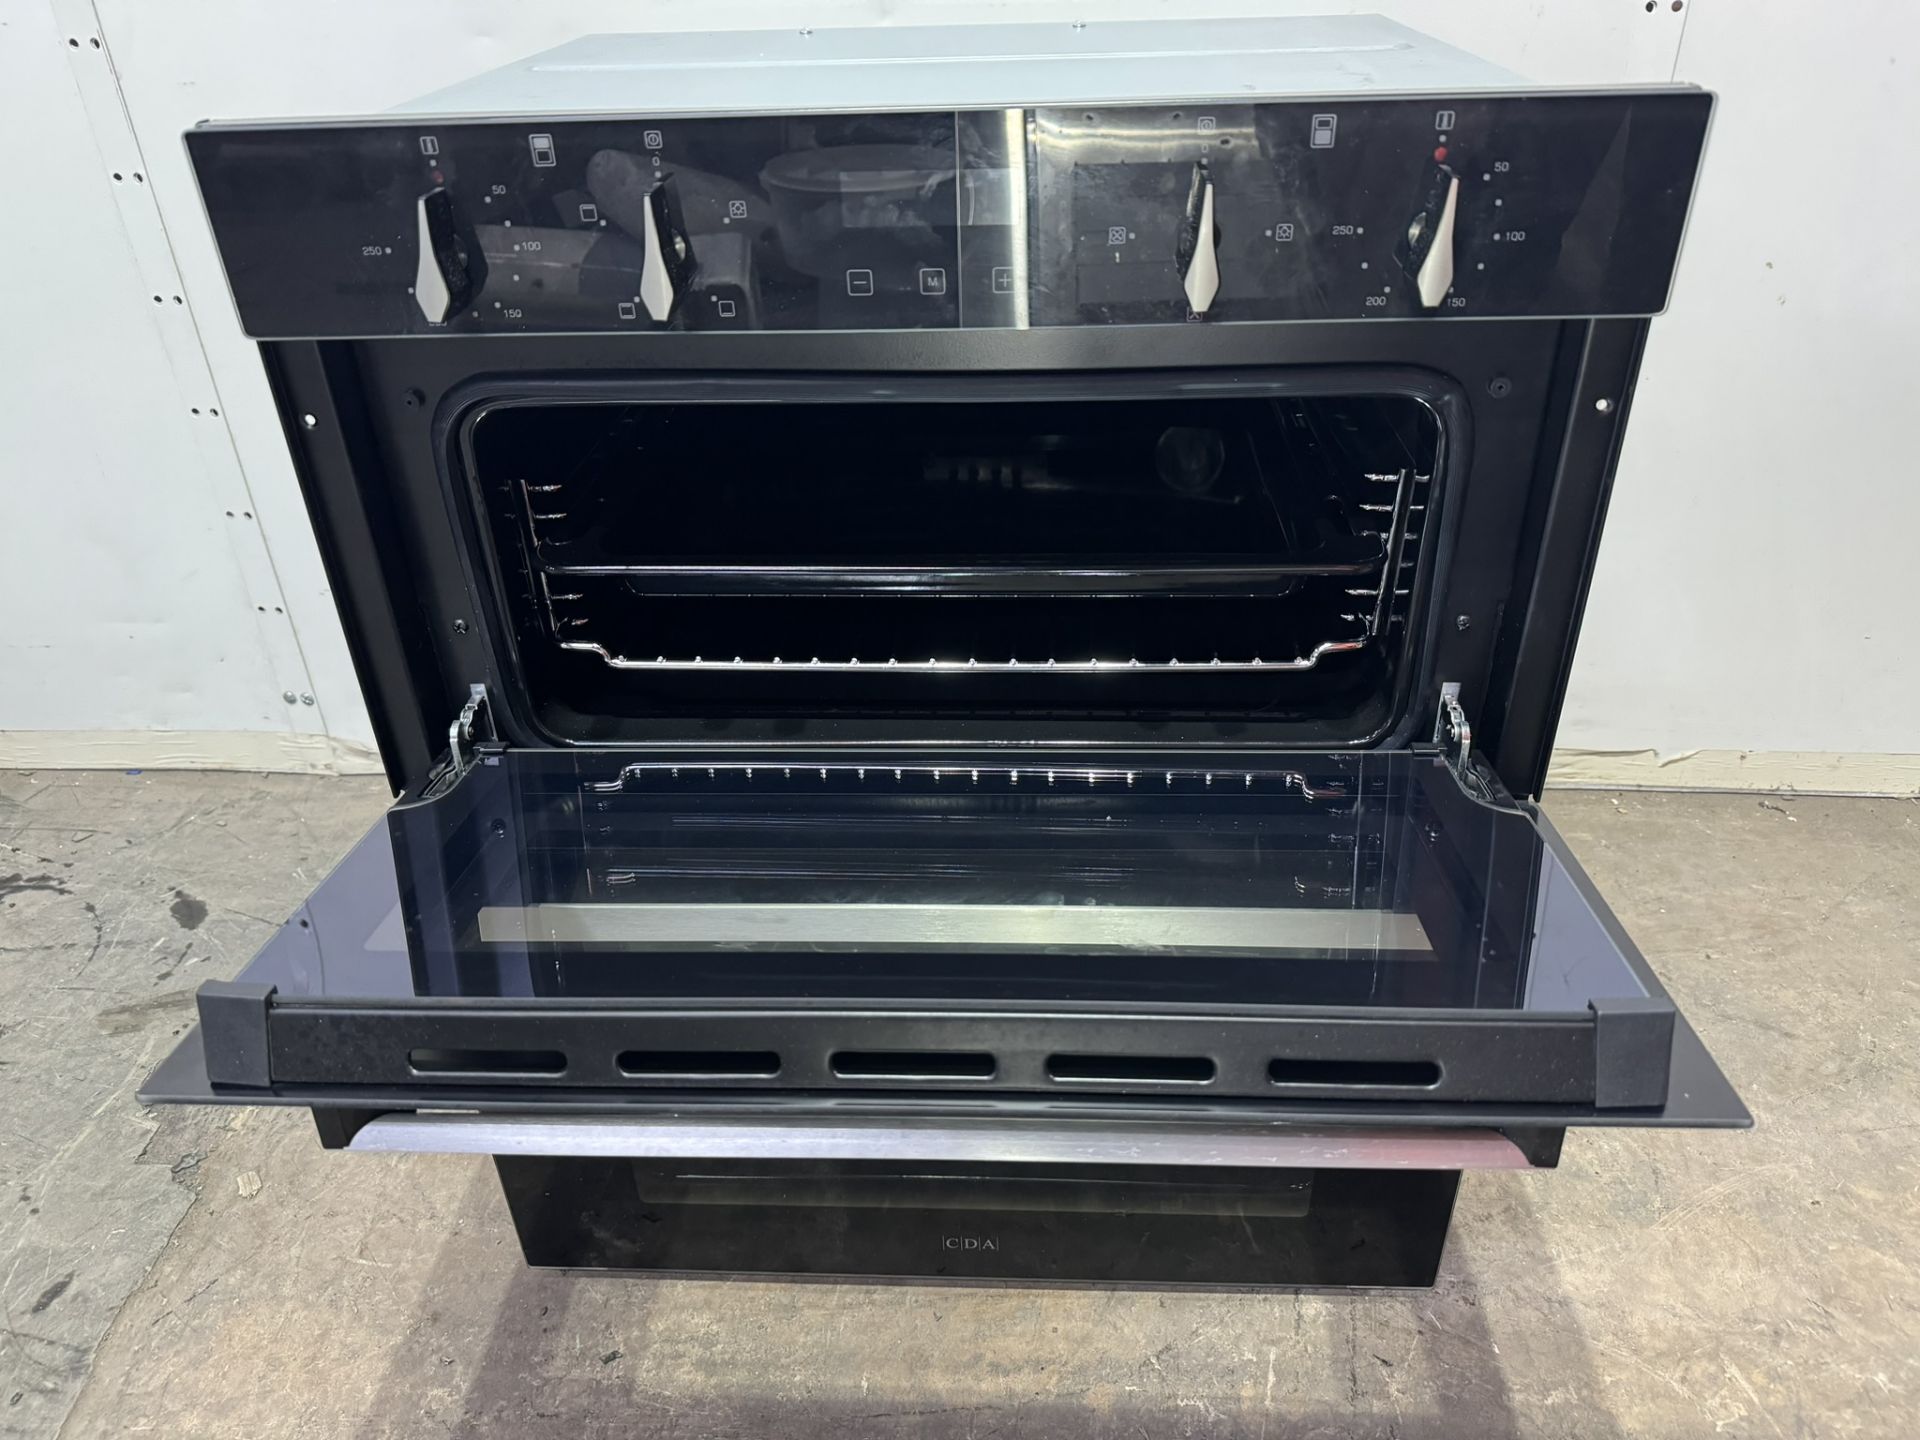 Ex-Display CDA DC741BL Built In Electric Double Oven - Image 3 of 5